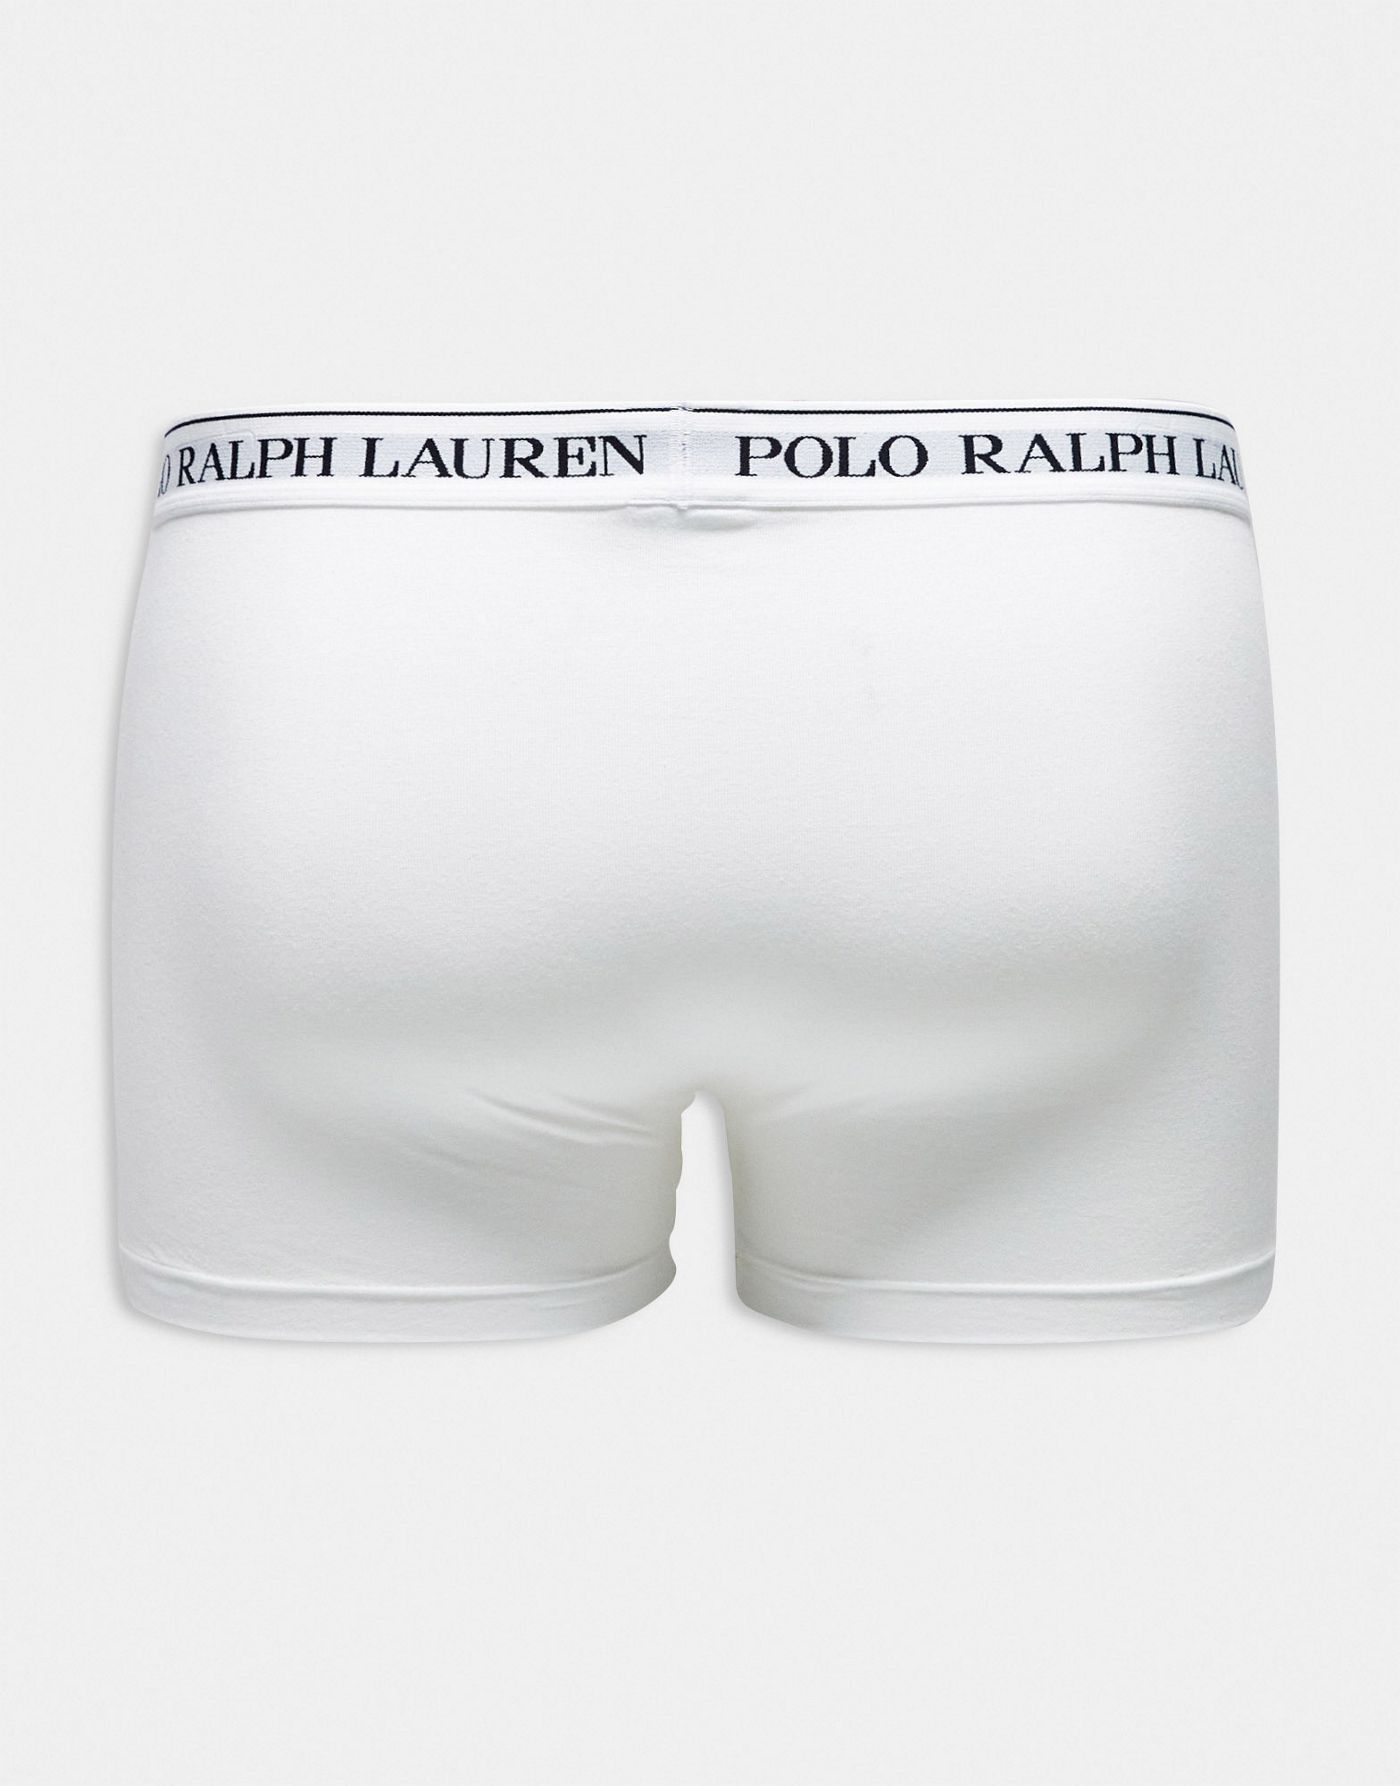 Polo Ralph Lauren 5 pack in black grey white with all over pony logo